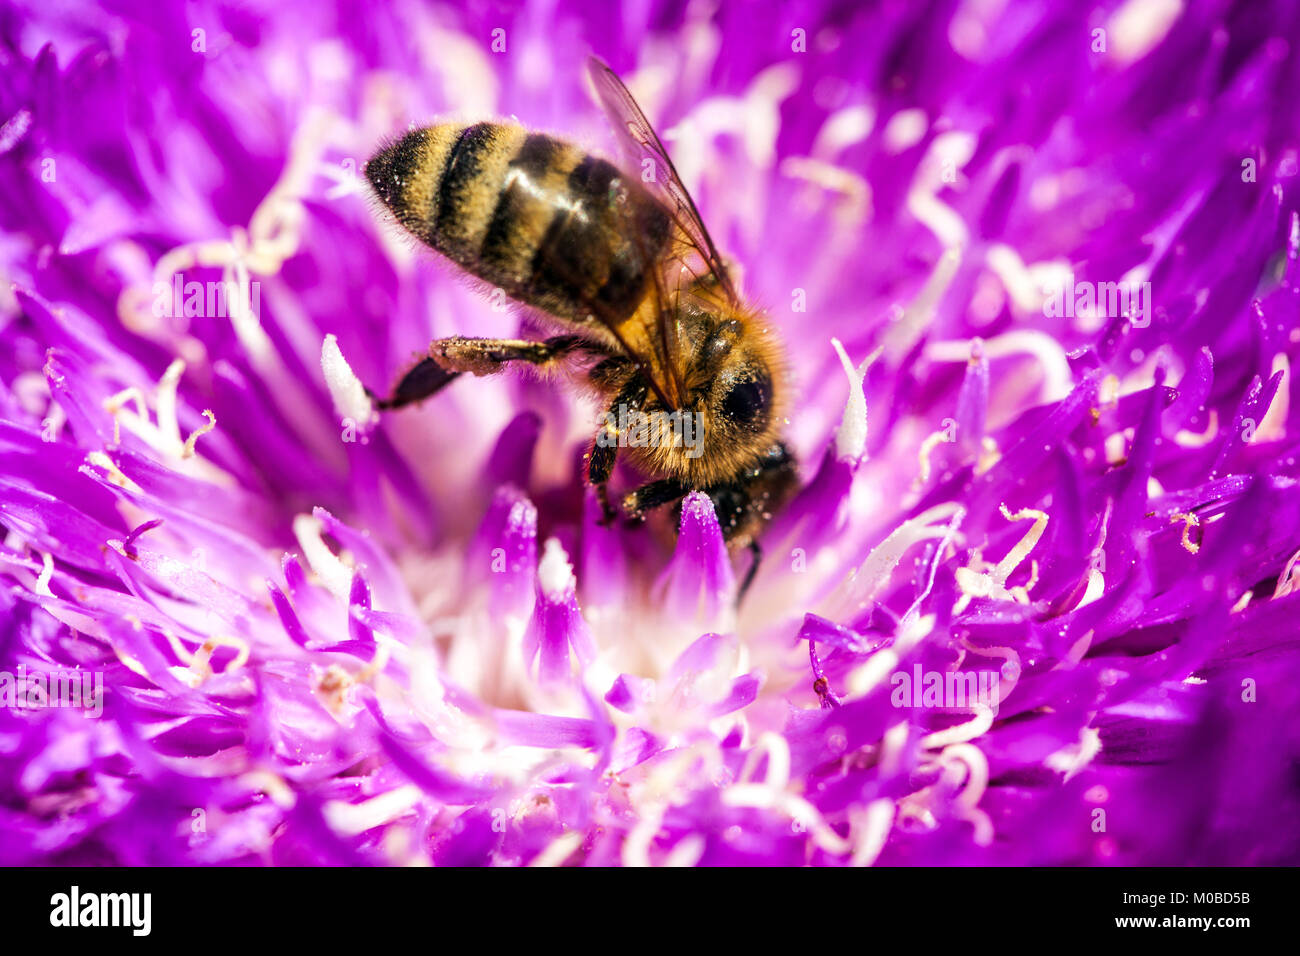 Stokesia laevis Honeysong Purple Stokesia Flower Bee in Flower Close Up bee Foraging in Bloom Closeup ApIs mellifera Insect European Honey Bee Feeding Foto Stock